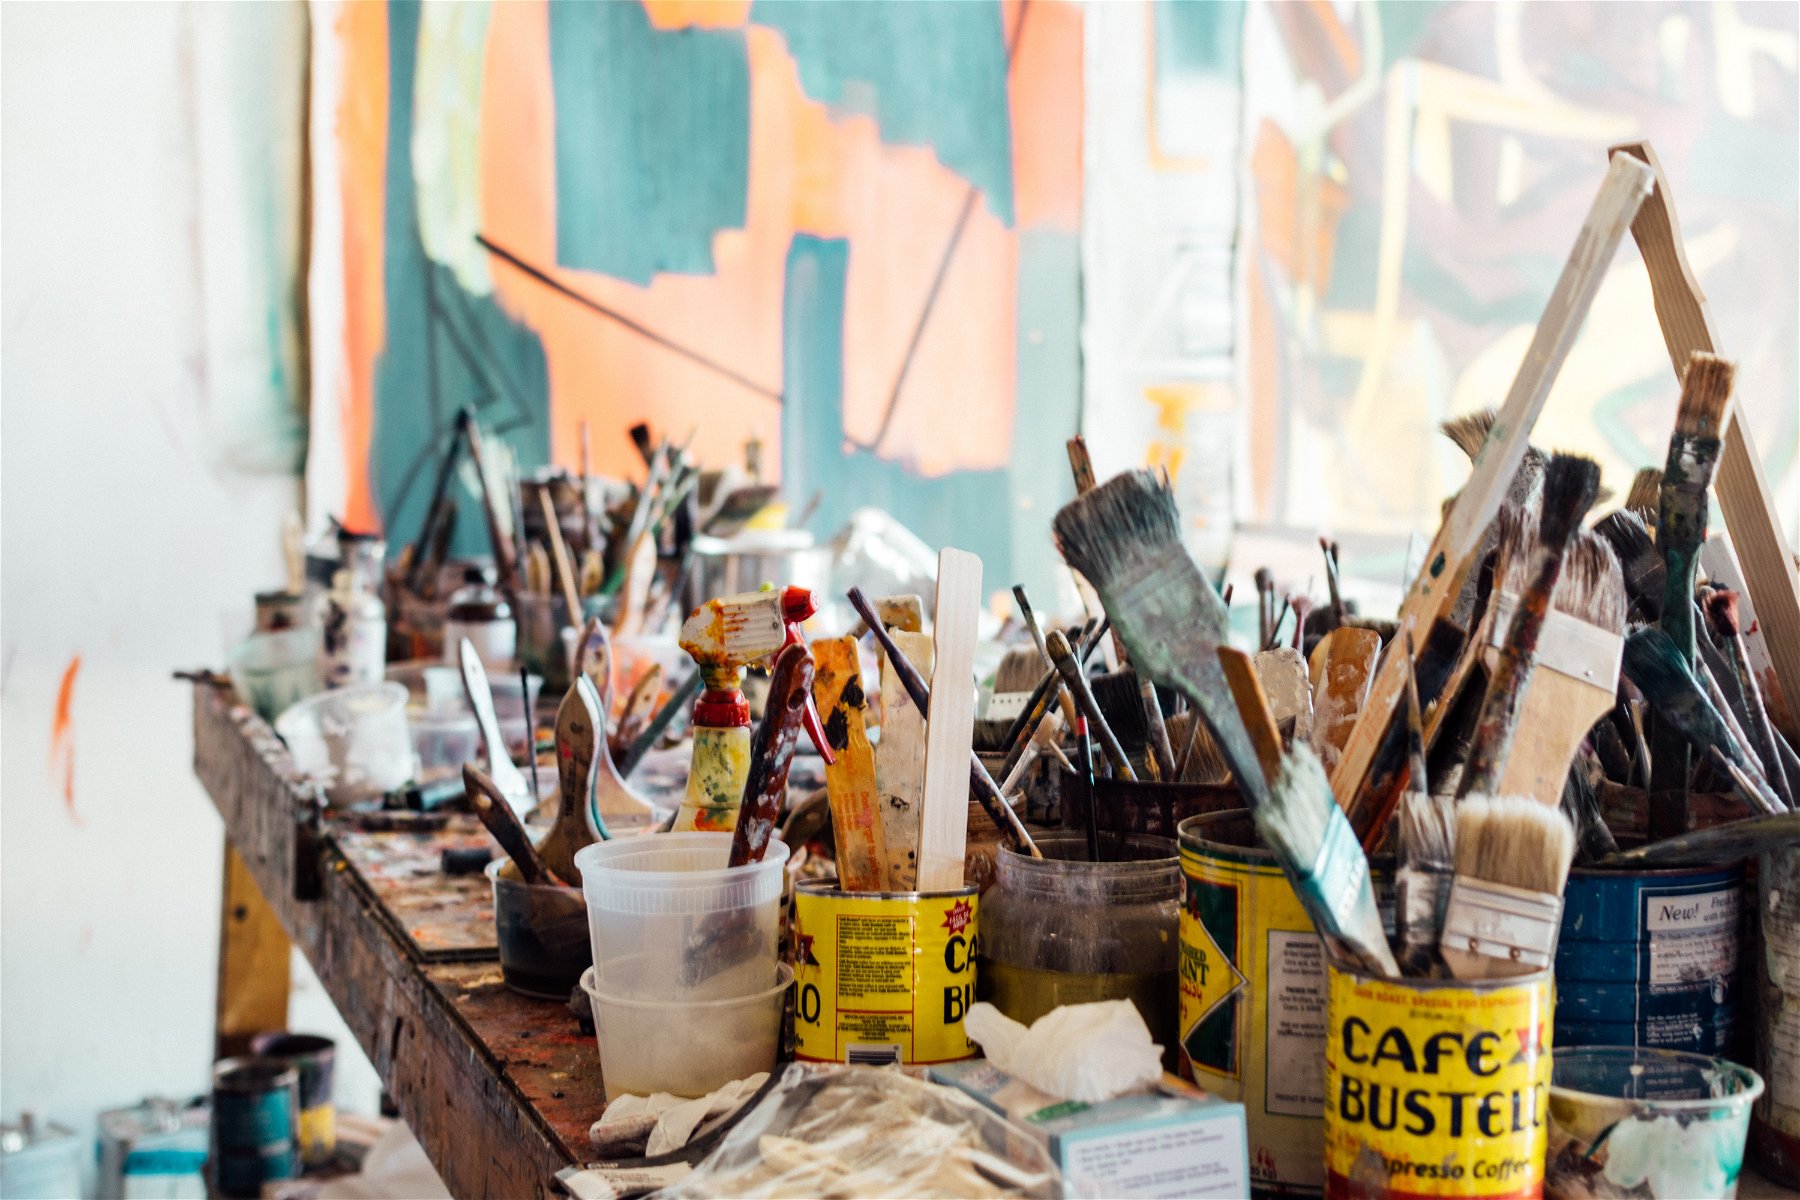 Getting Inside the Studio: The Importance of Artist Studio Visits